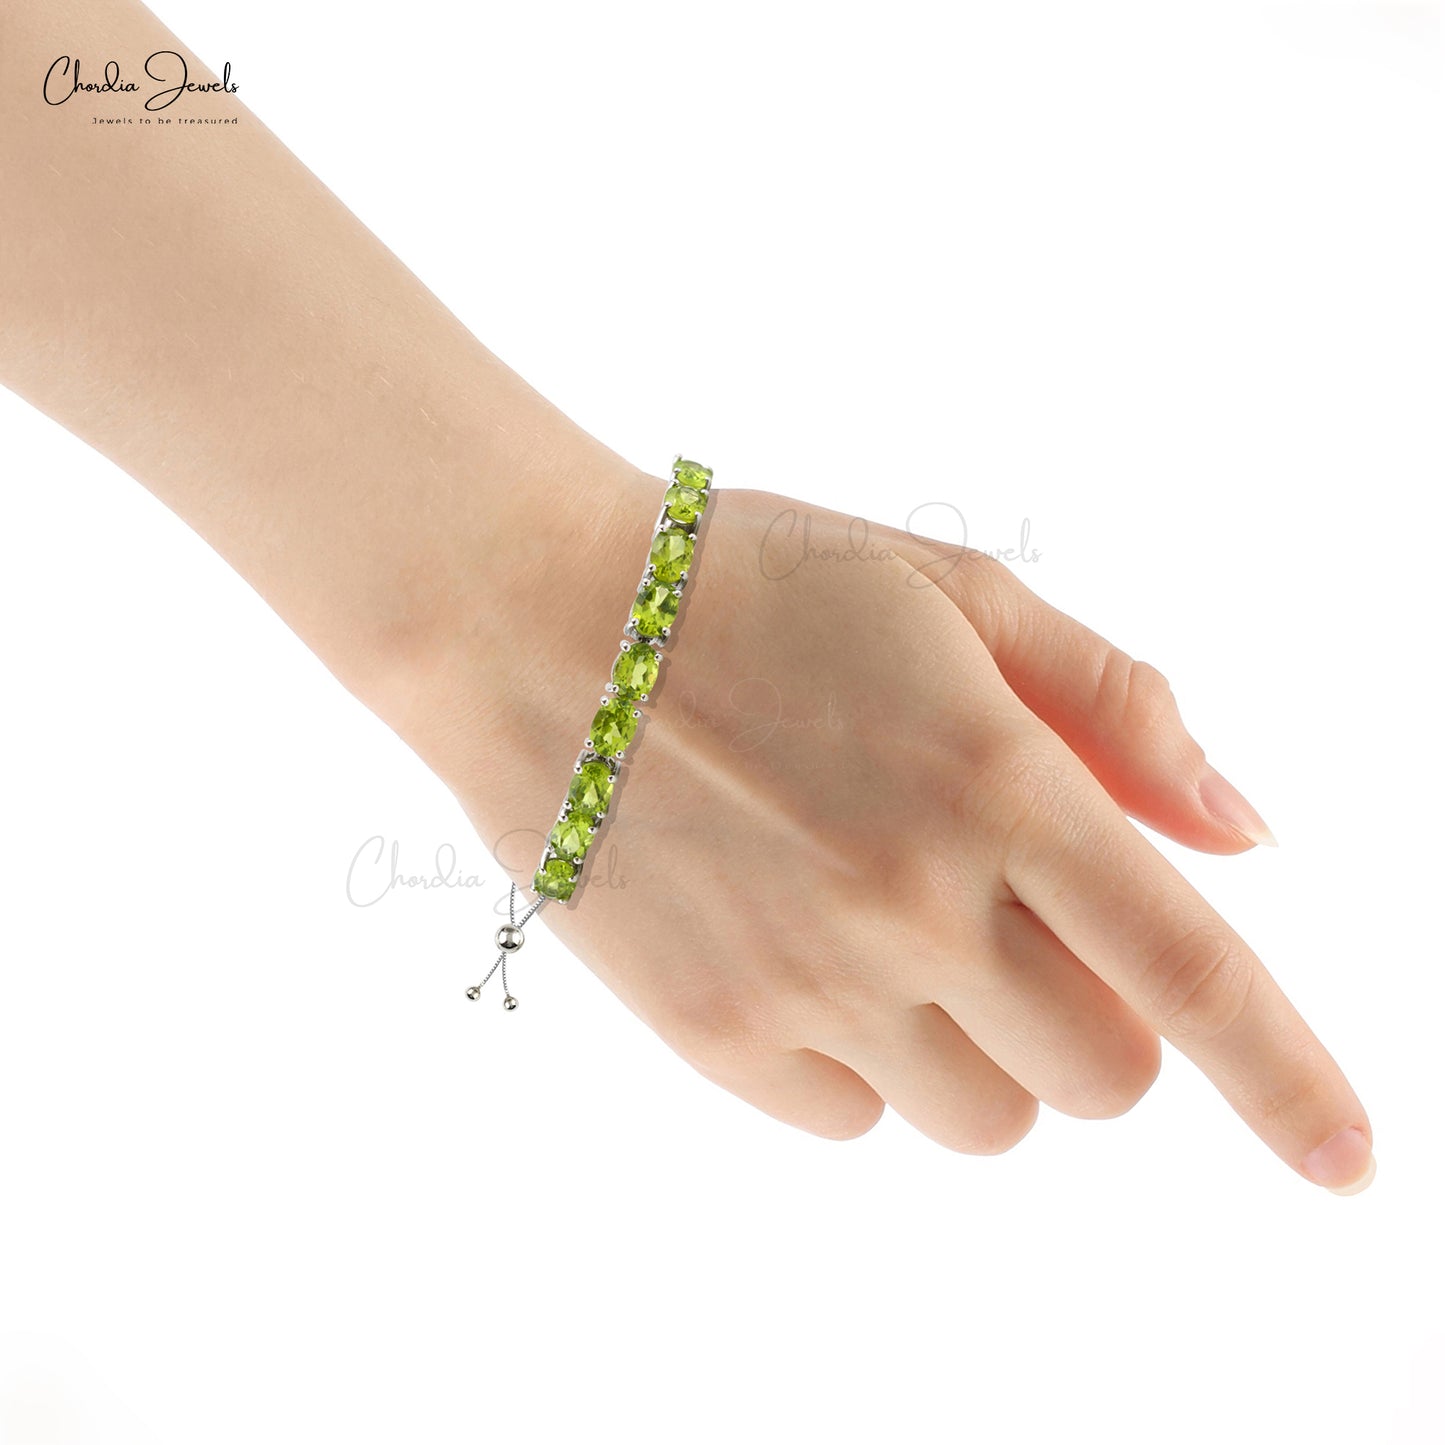 Load image into Gallery viewer, Top Manufacturer Authentic Peridot Bracelet 925 Sterling Oval Cut Gemstone Sliver Jewelry August Birthstone Jewelry At Offer Price
